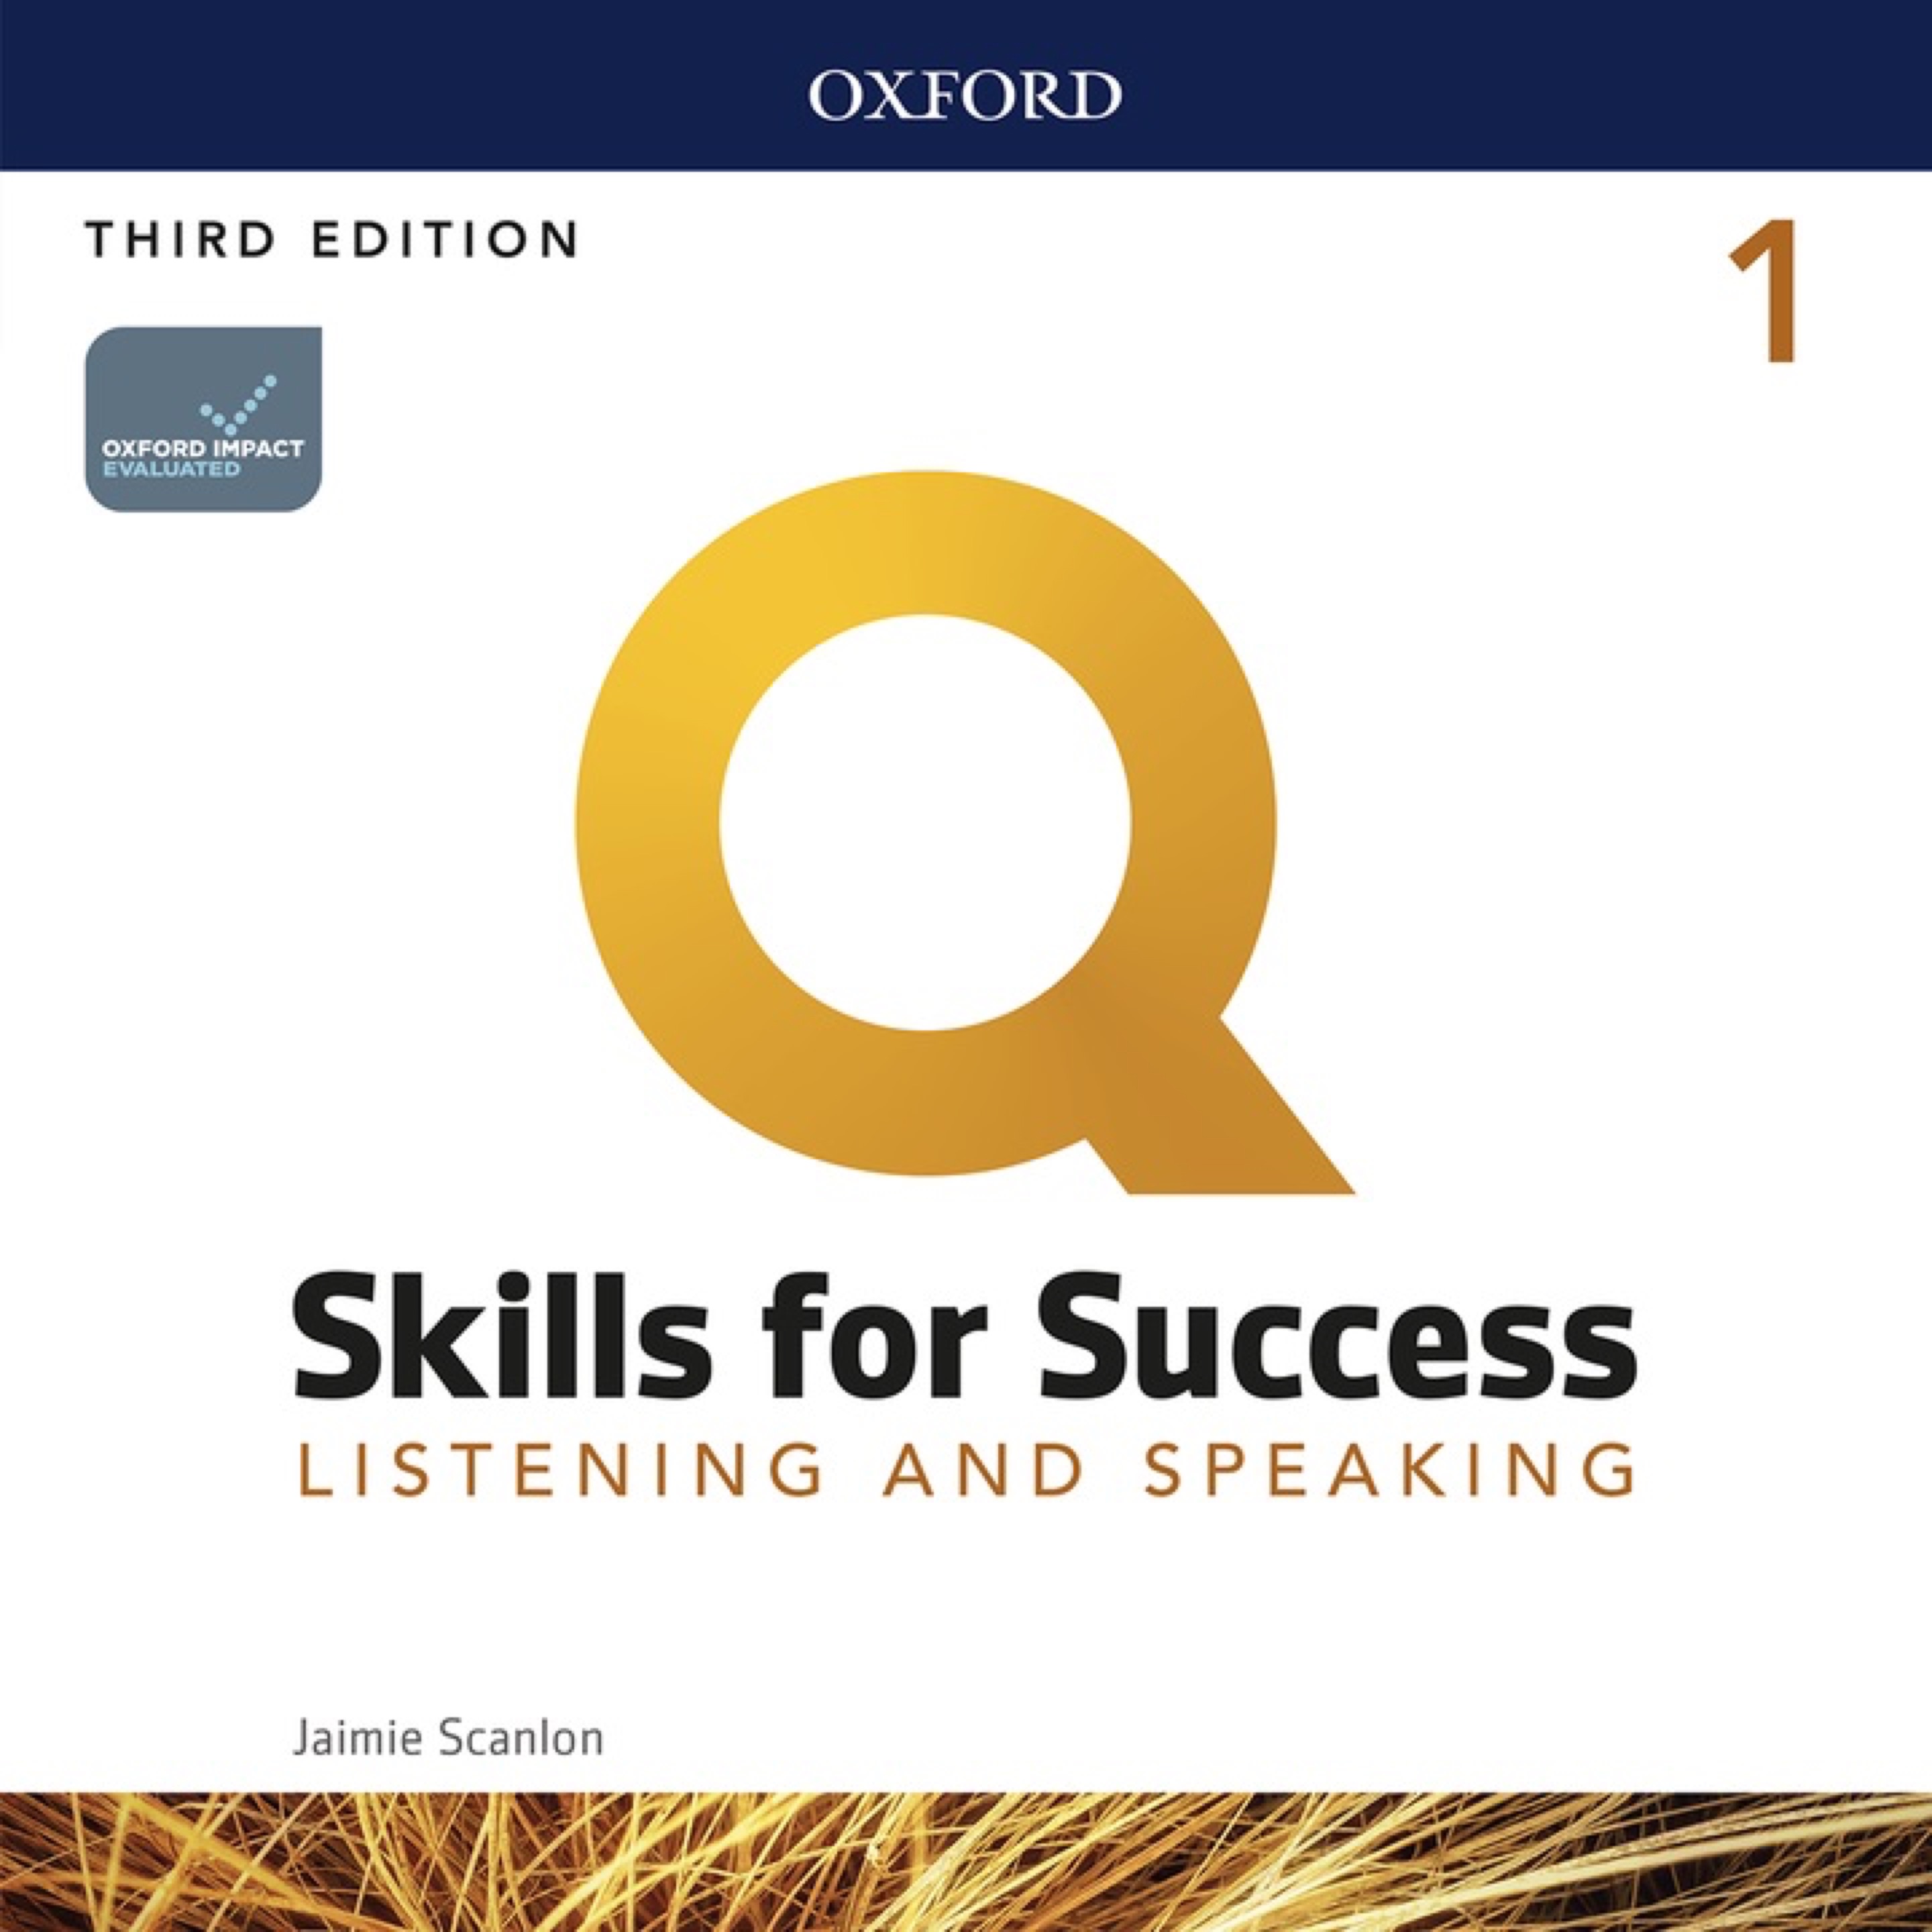 Q: Skills for Success 3rd Edition